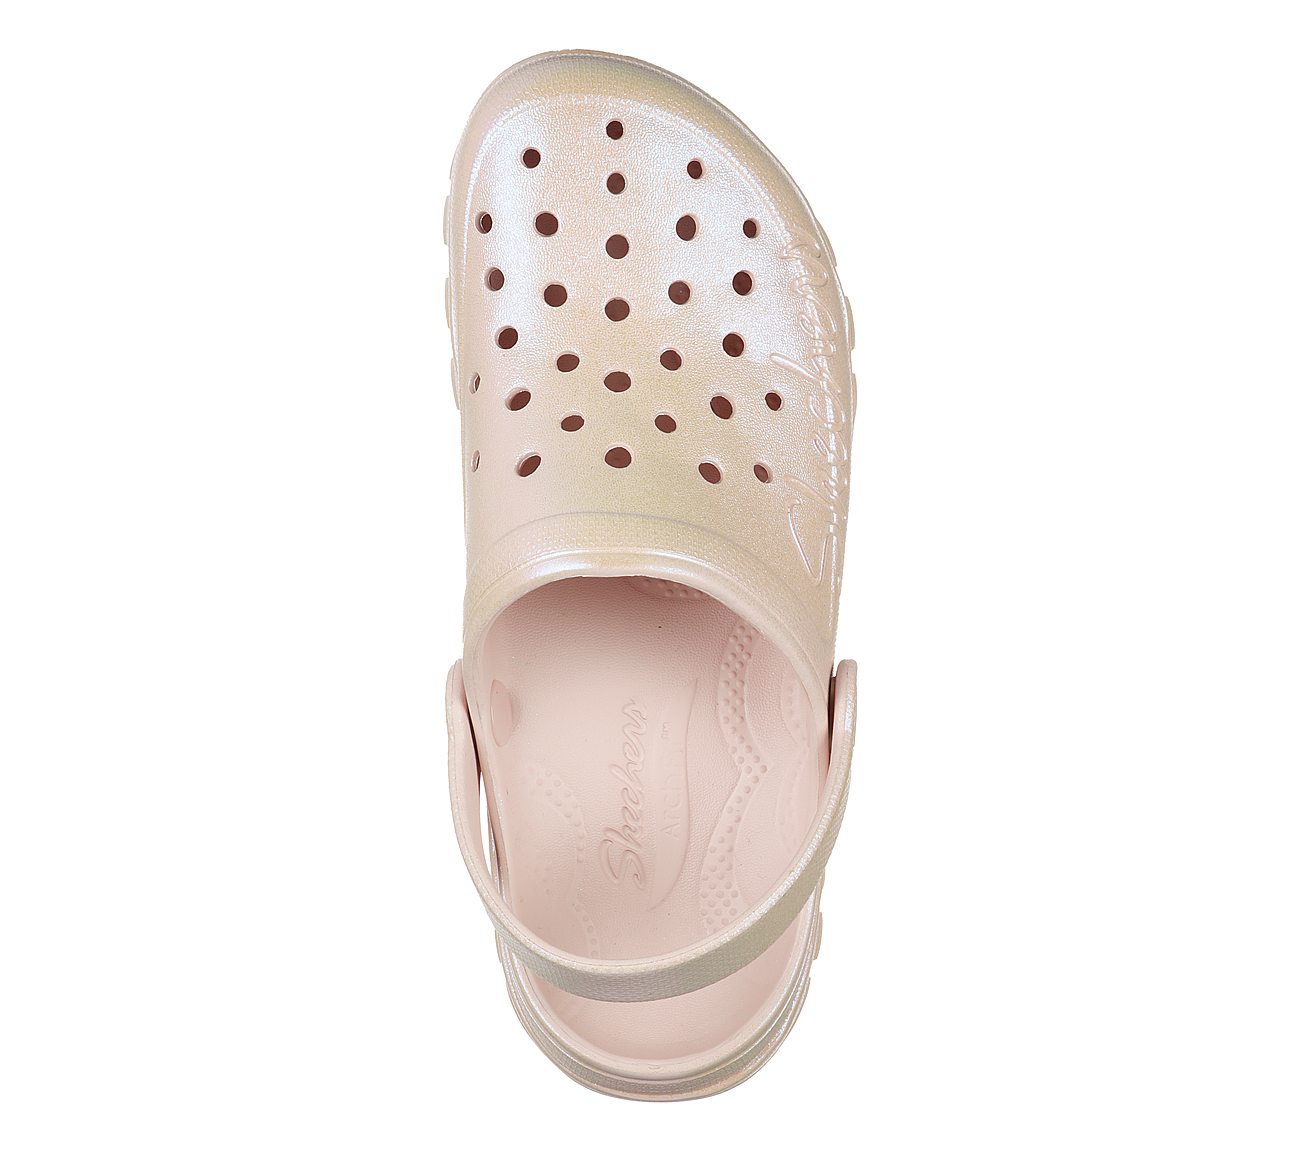 ARCH FIT FOOTSTEPS-PIXIE DUST, LLLIGHT PINK Footwear Top View